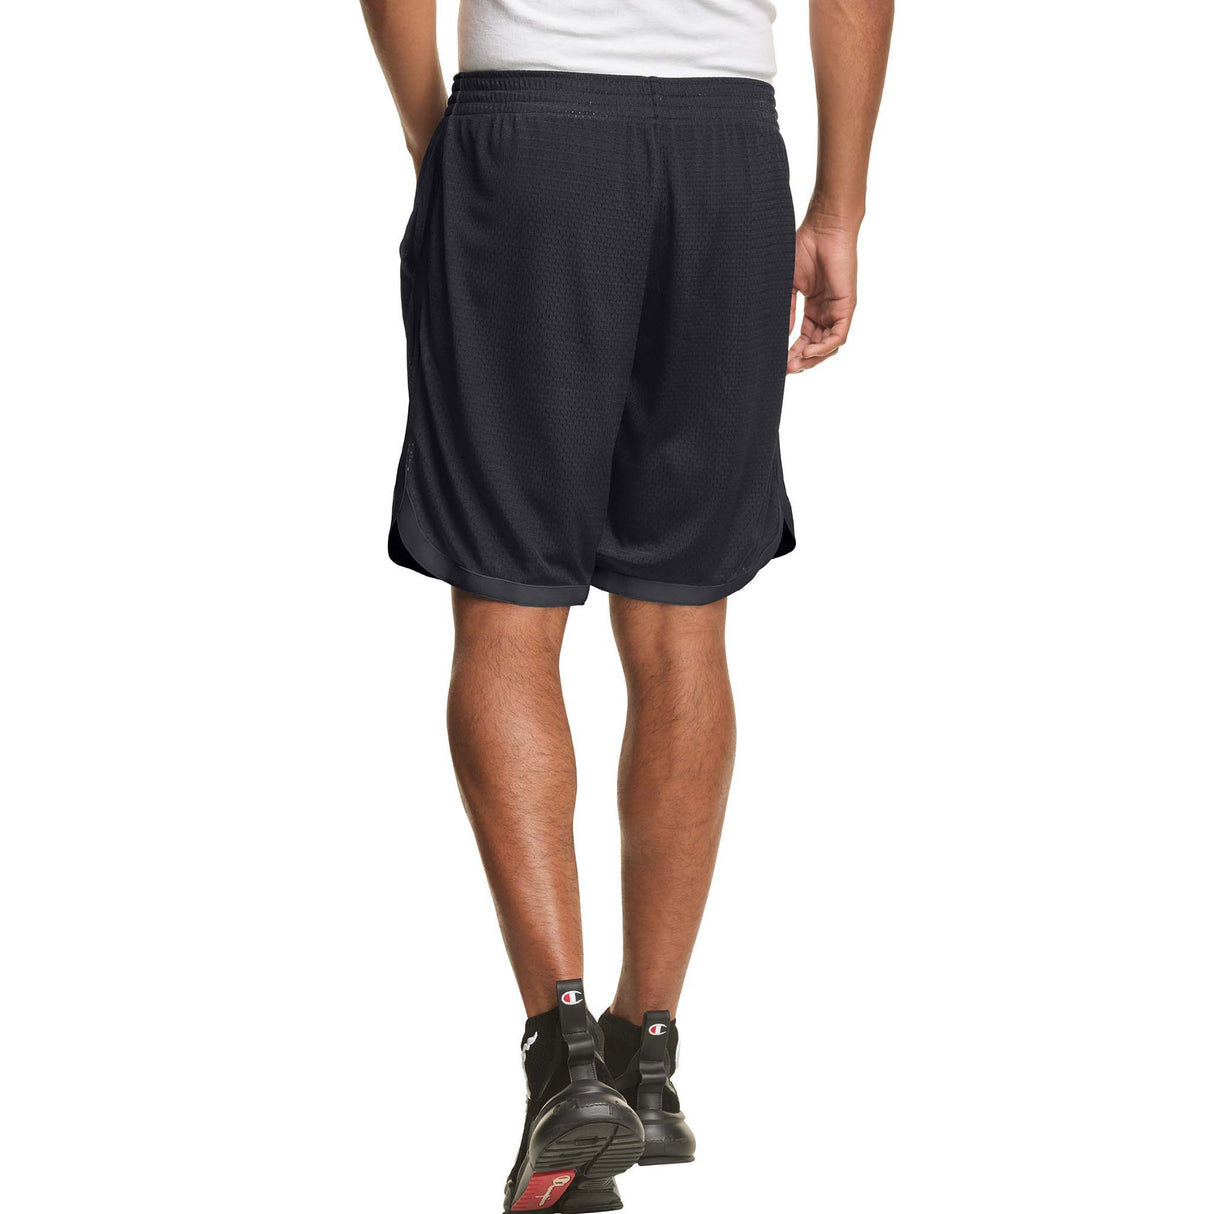 Champion 7 Inch Taped Mesh Short noir homme dos